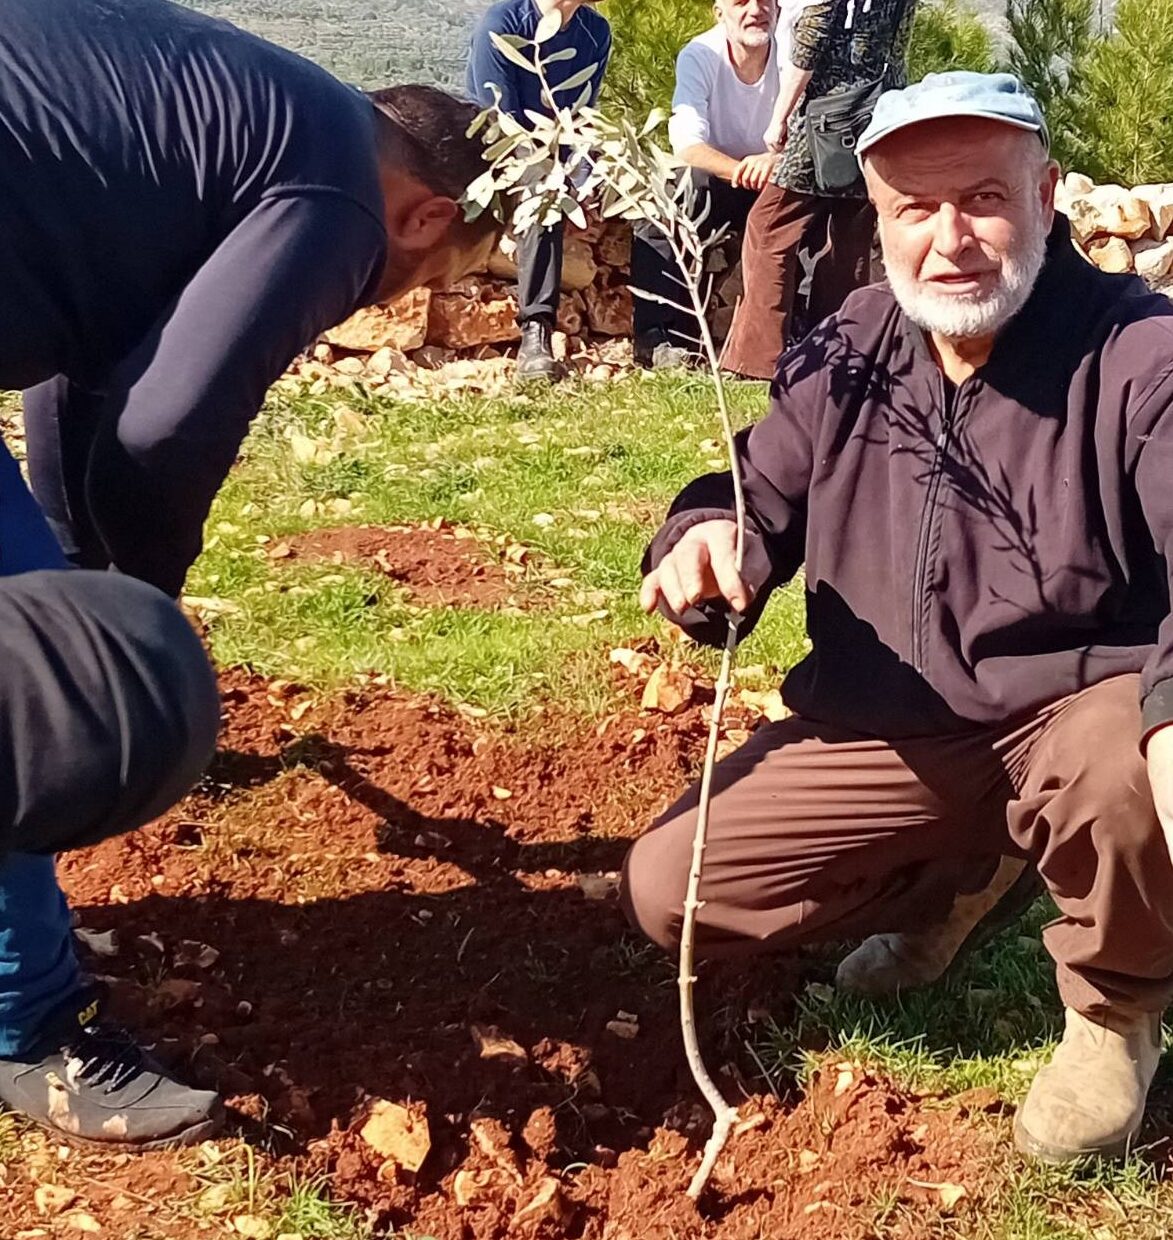 Planting olive trees as an act of resistance